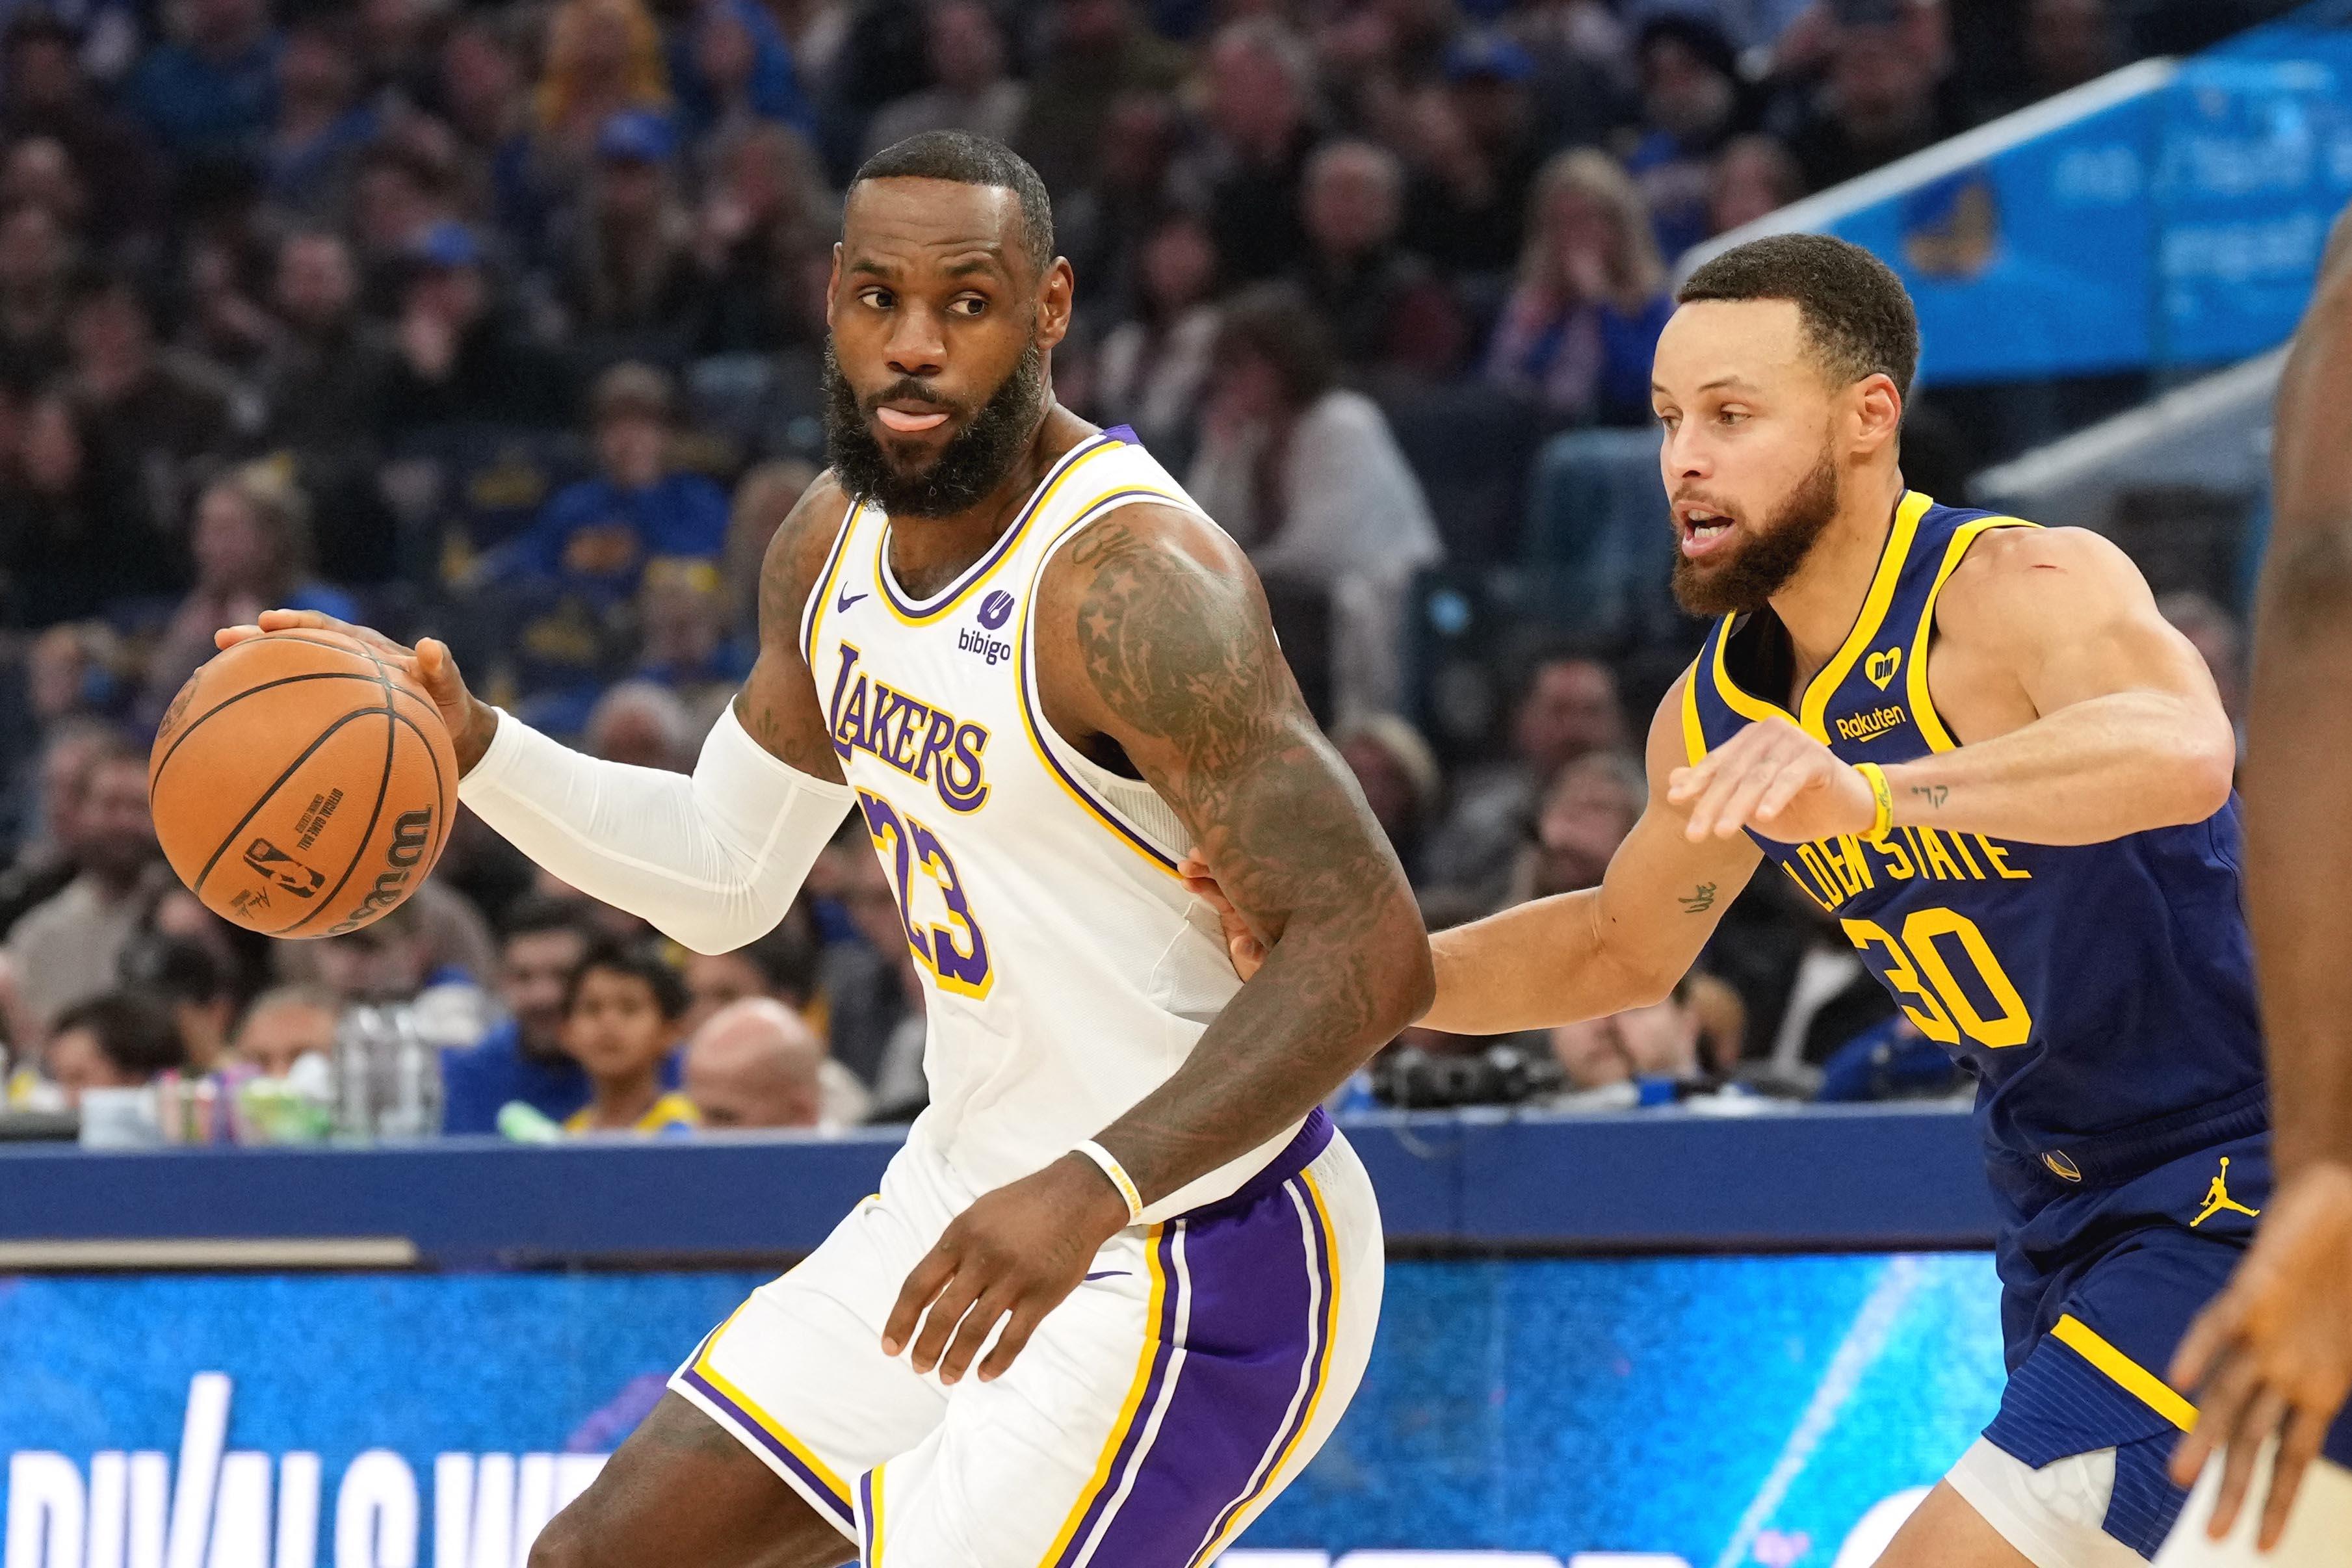 NBA: LeBron James' triple-double lifts Lakers over Warriors in 2OT